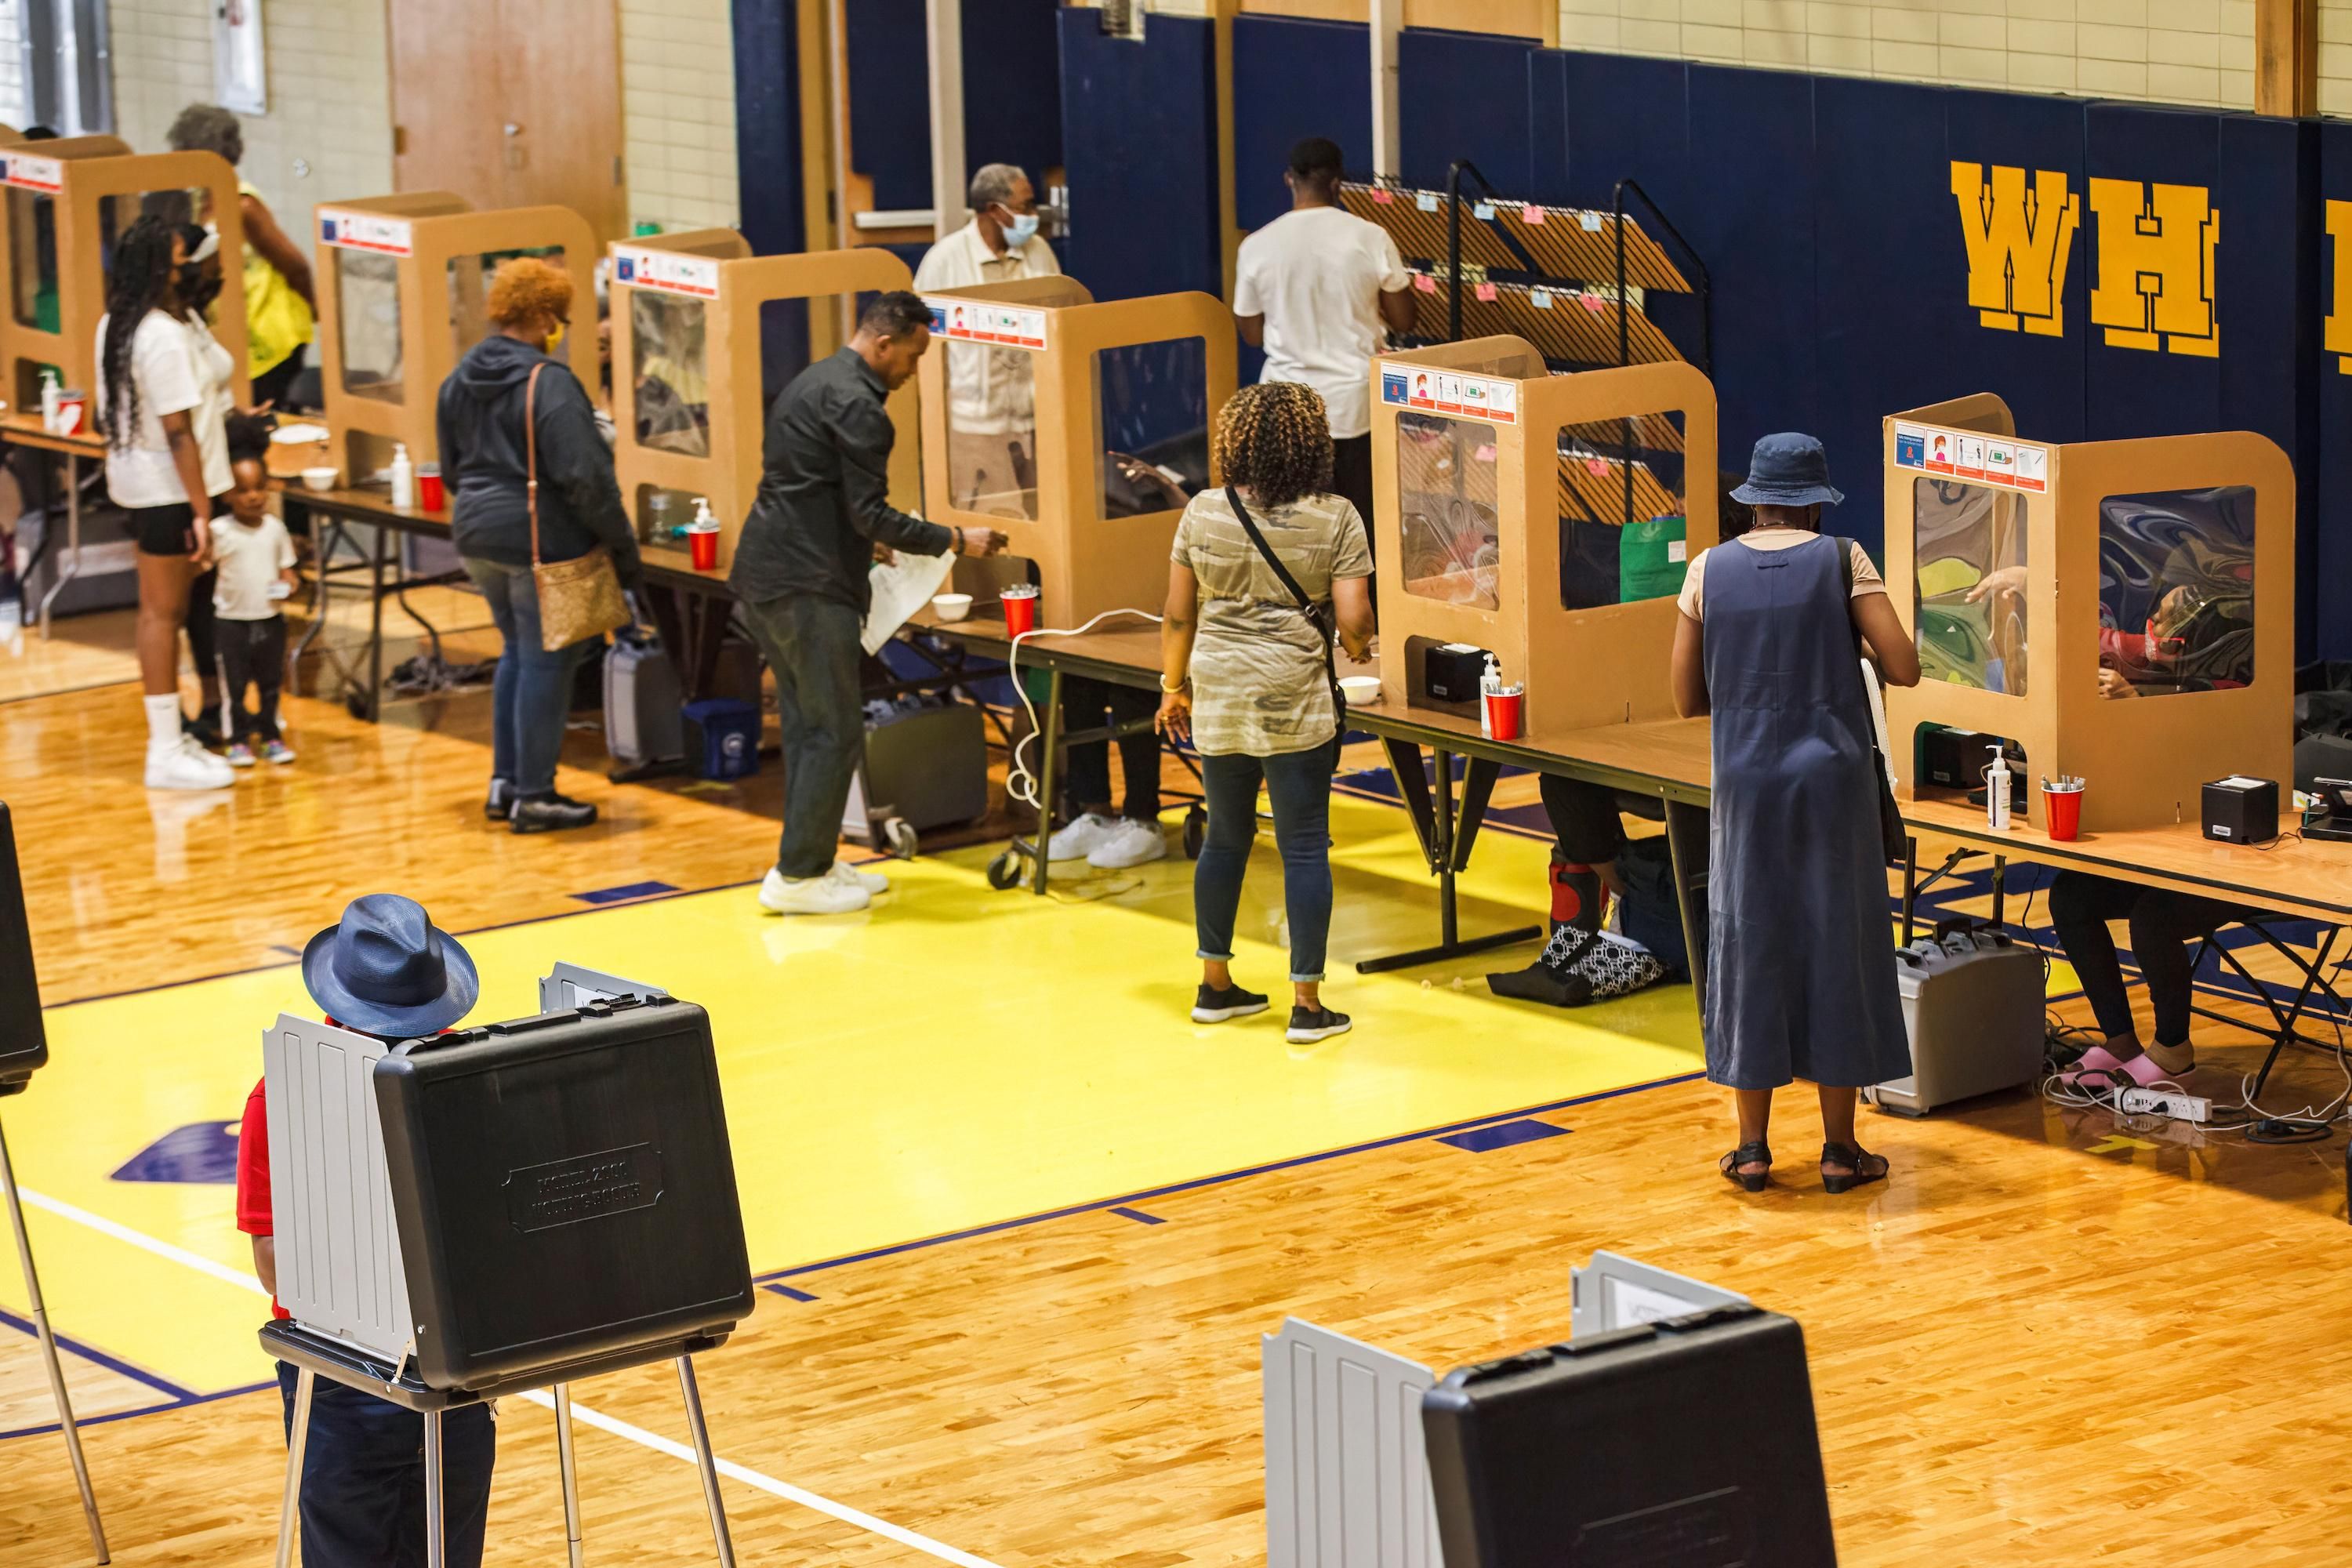 Ohio voters at a polling place